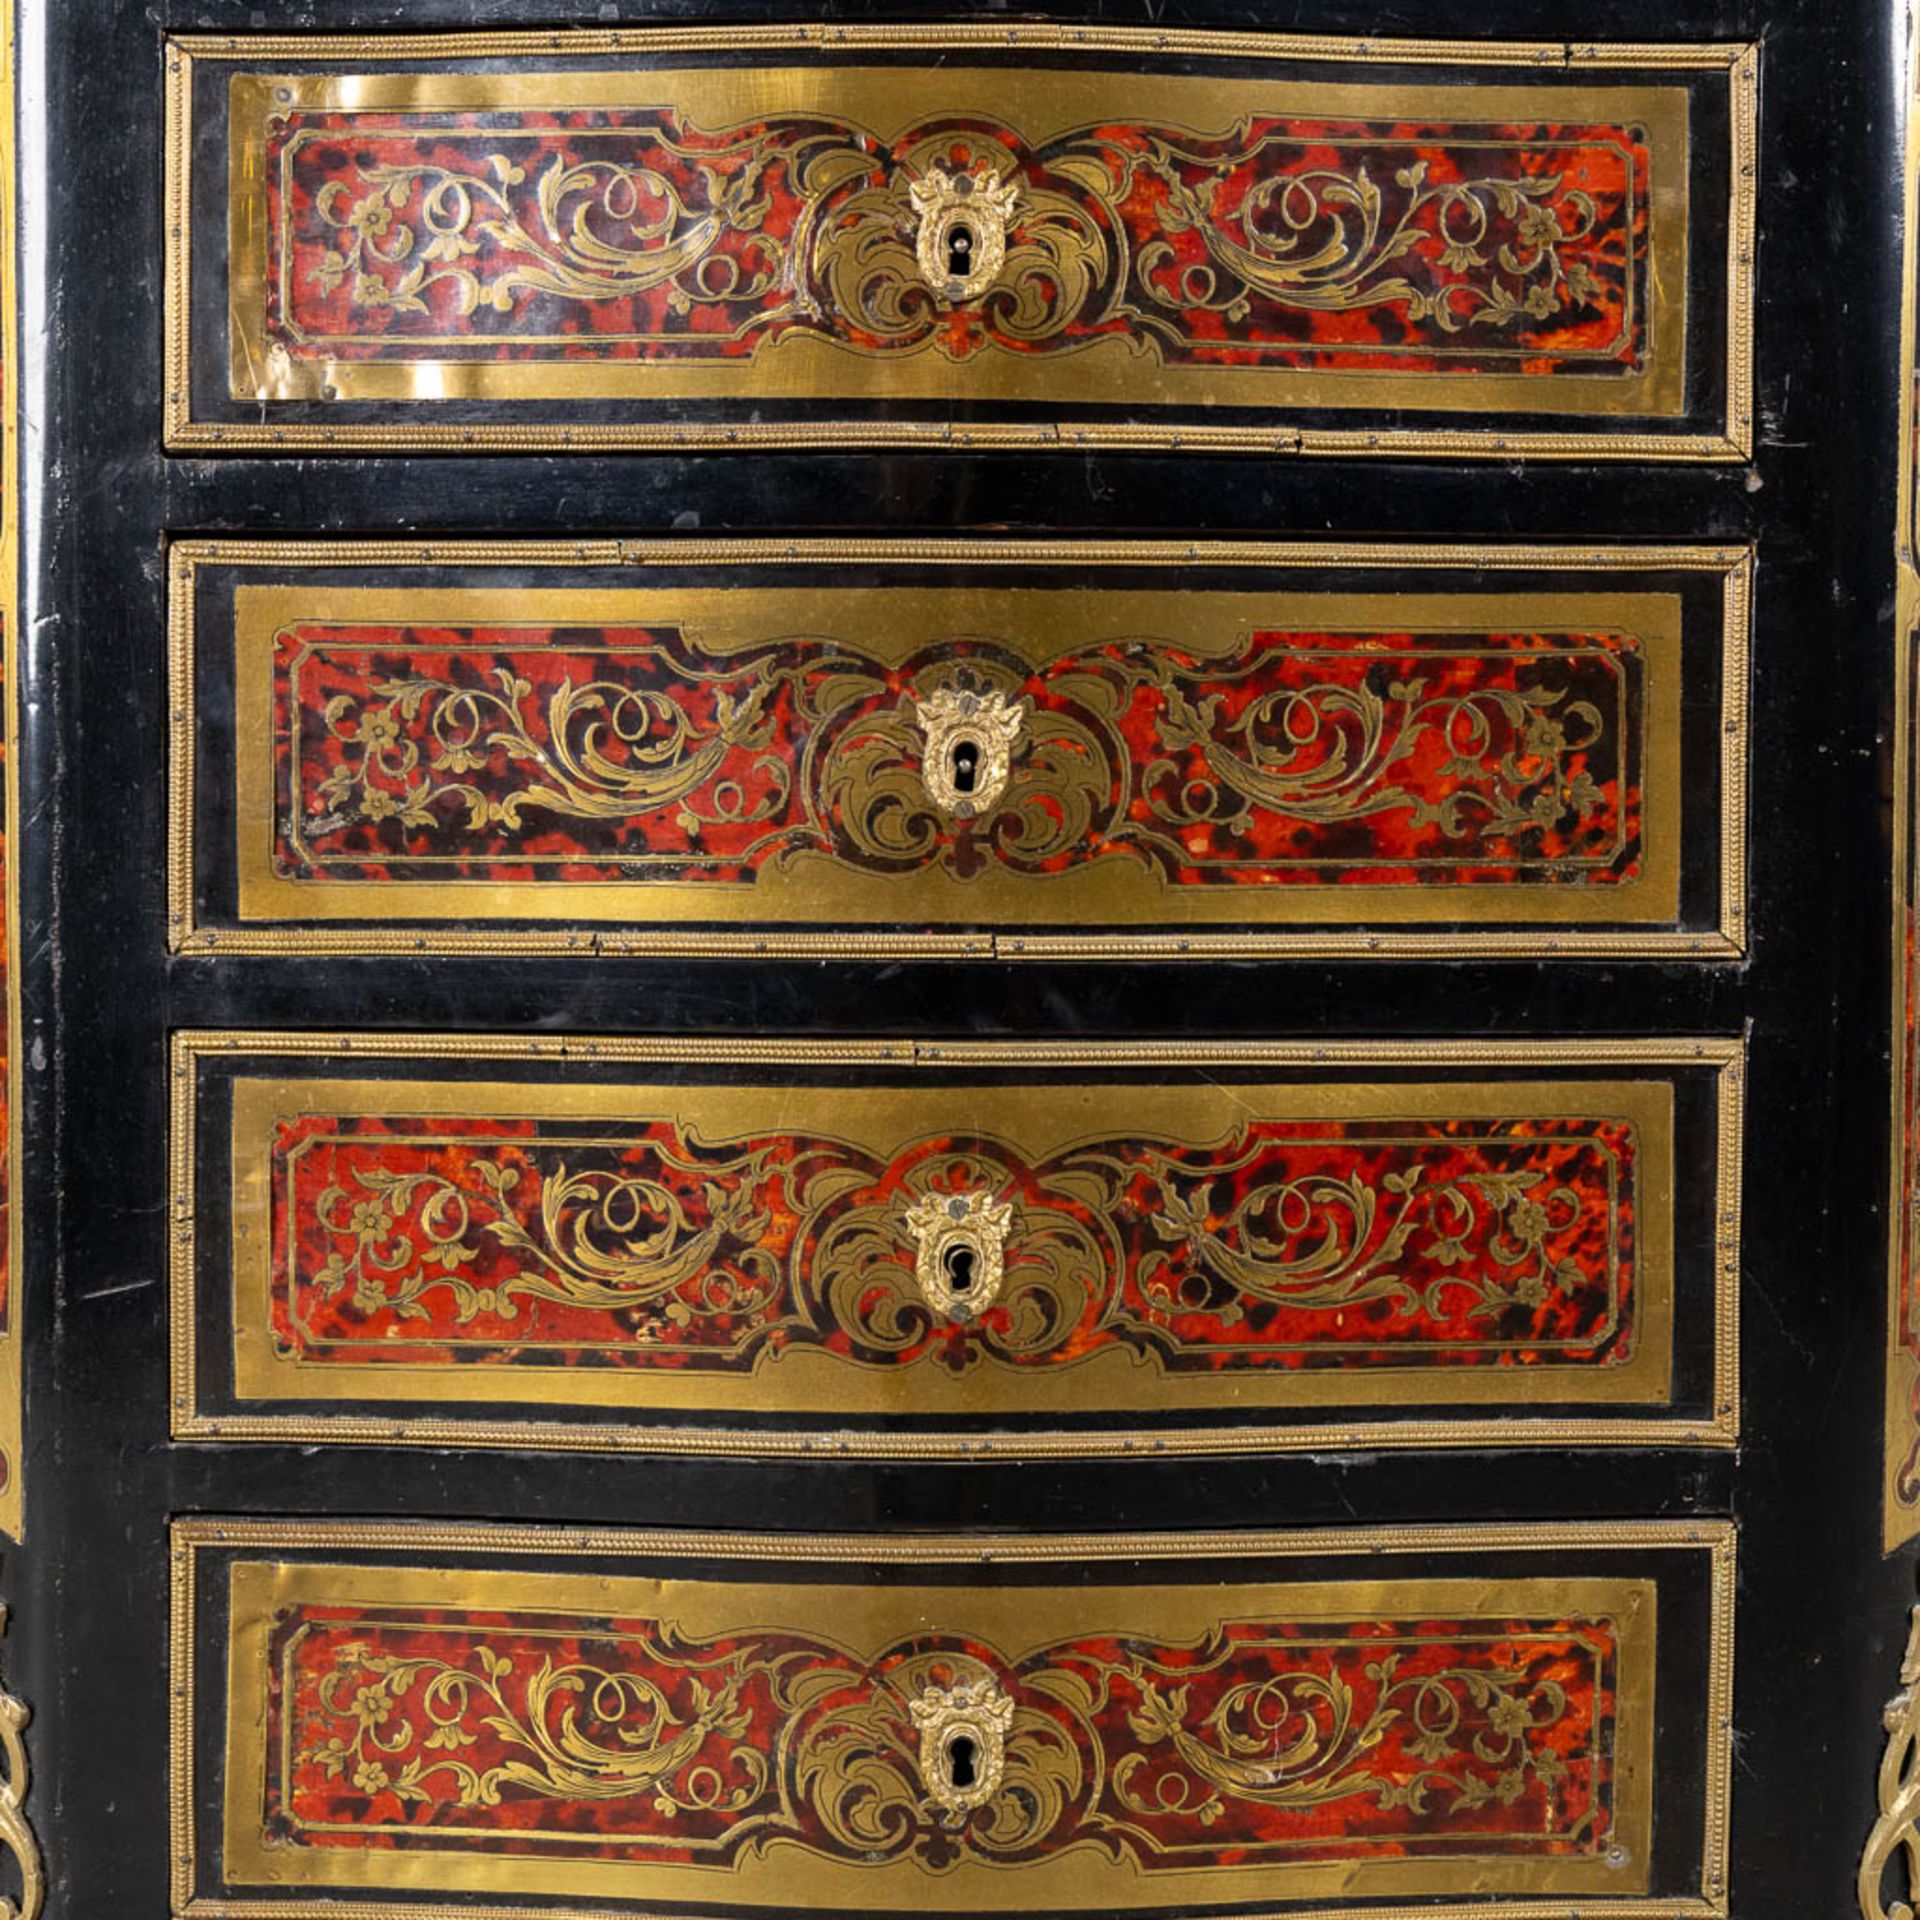 A Boulle inlay secretaire cabinet, Napoleon 3 period, 19th C. (L:36 x W:75 x H:122 cm) - Image 12 of 18